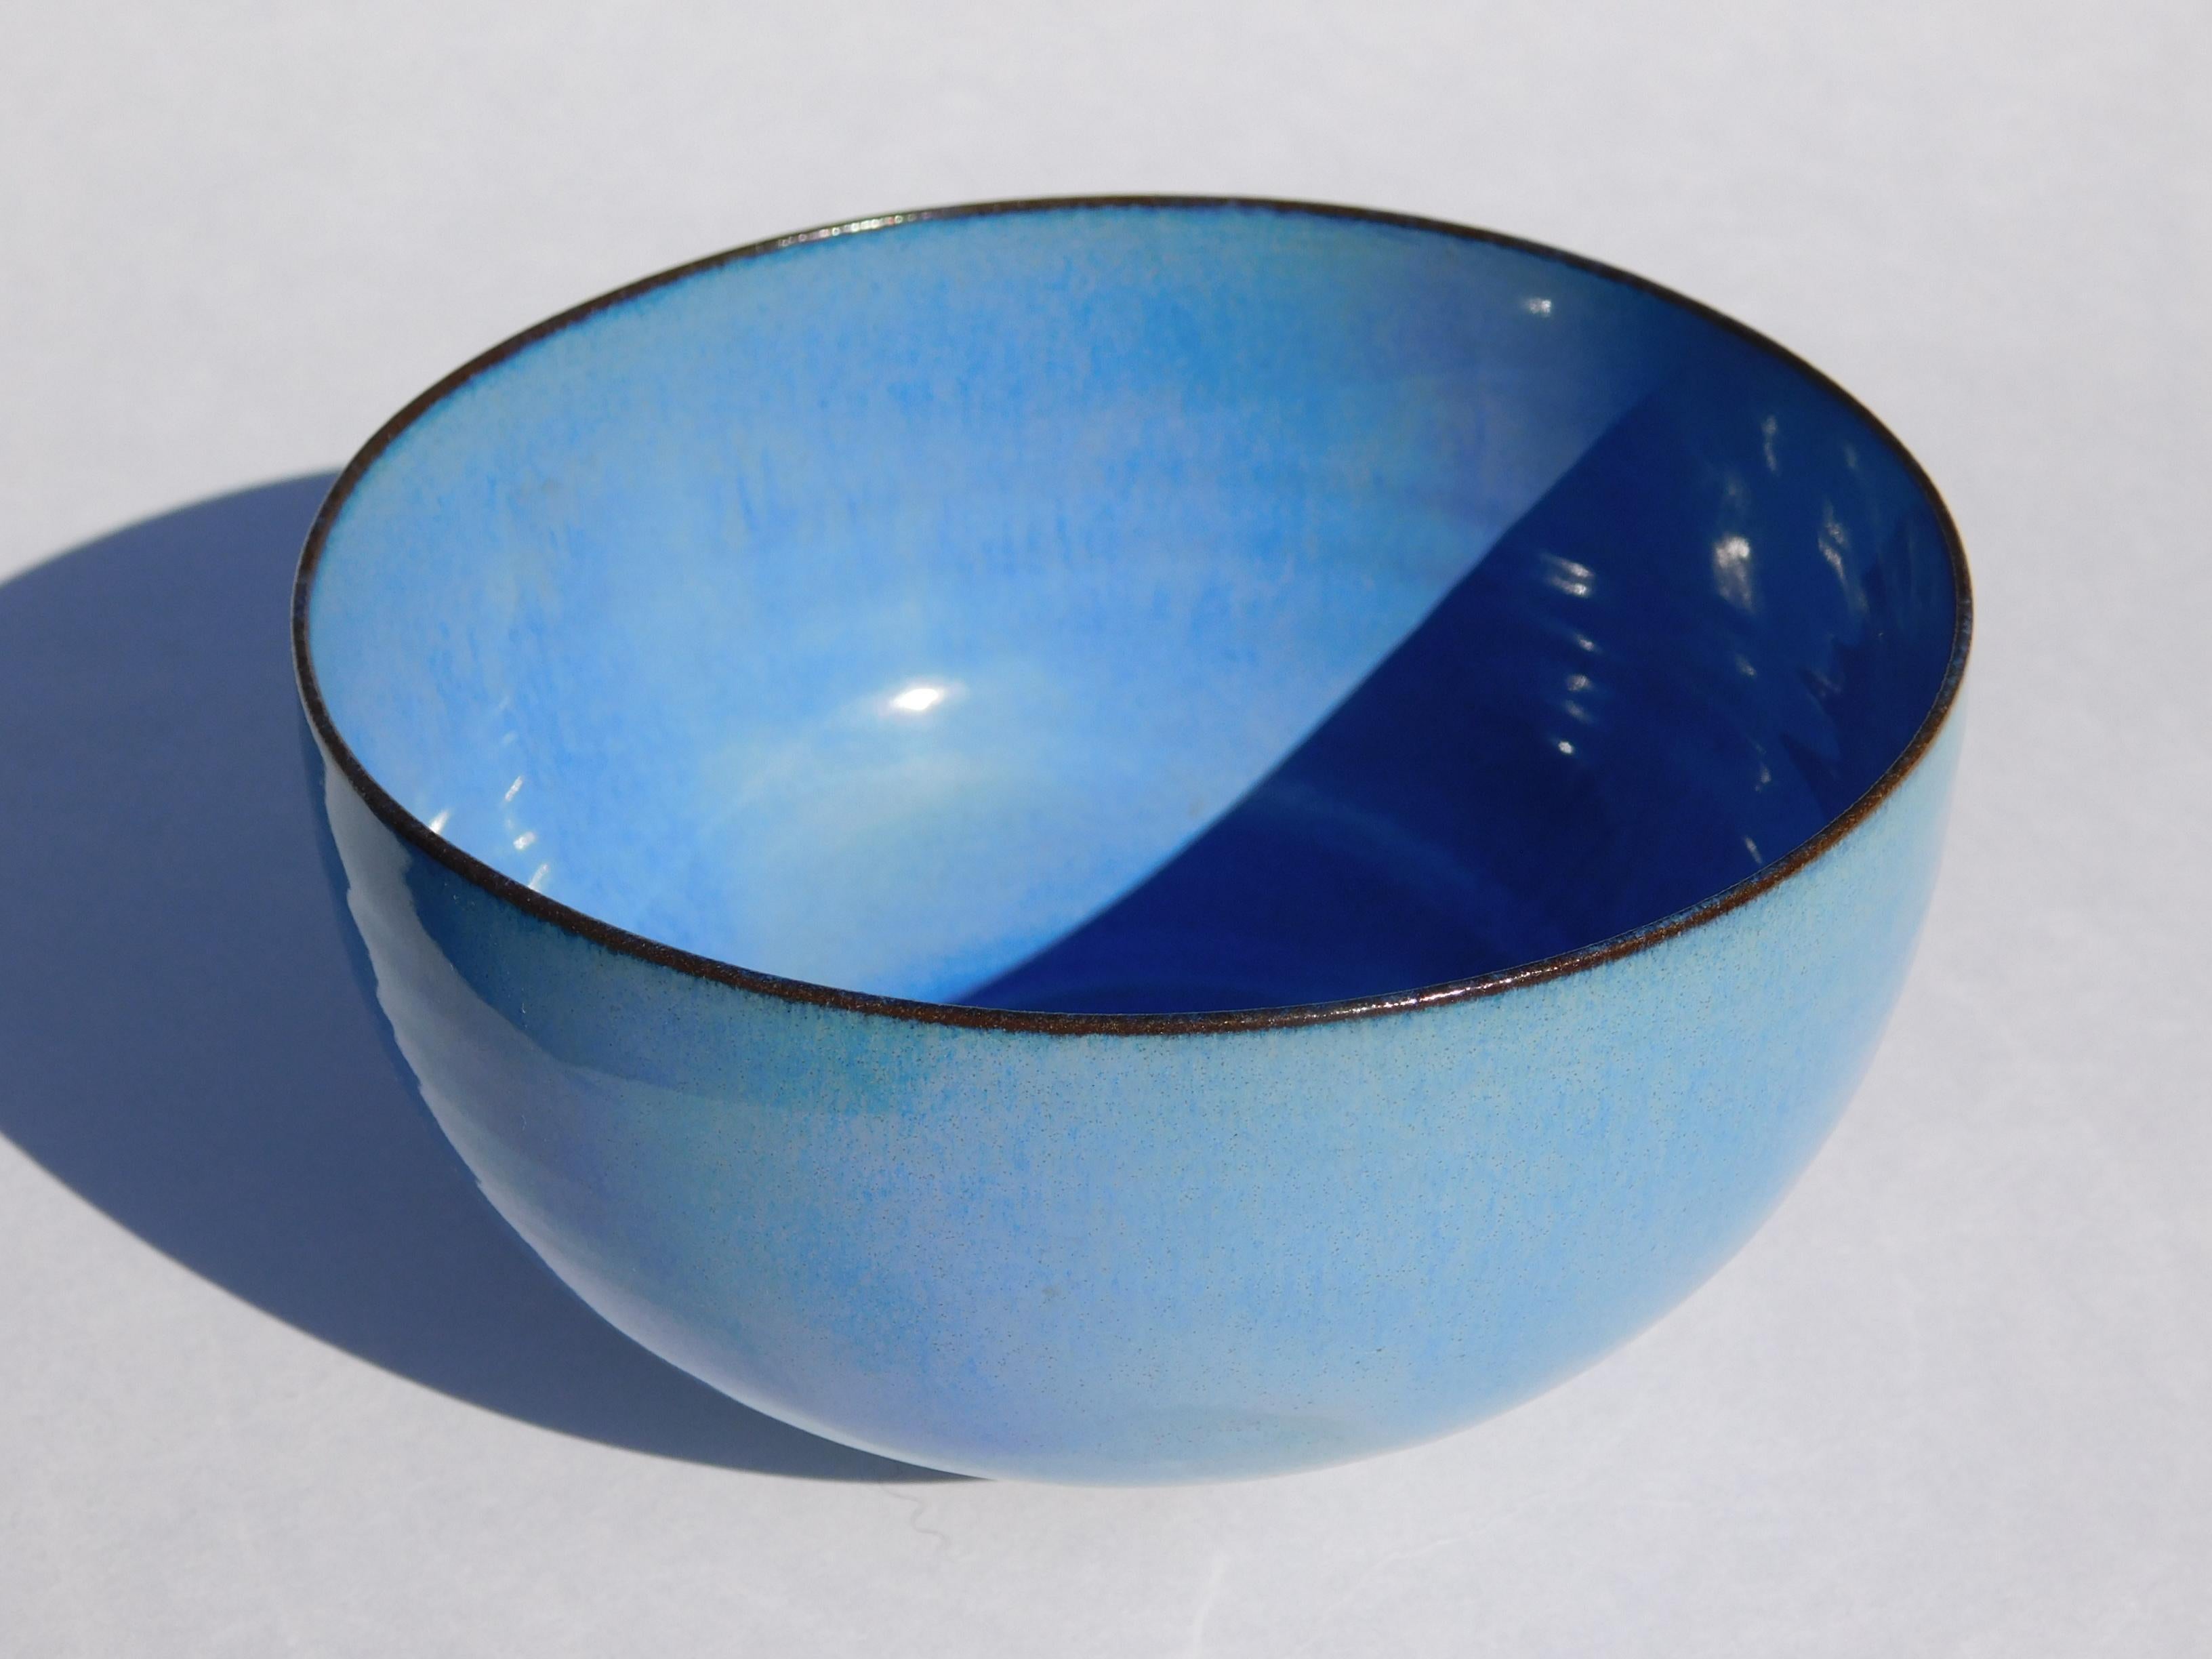 Gertrud and Otto Natzler Footed Studio Bowl, 1966 - Robin’s Egg Blue In Good Condition For Sale In Phoenix, AZ